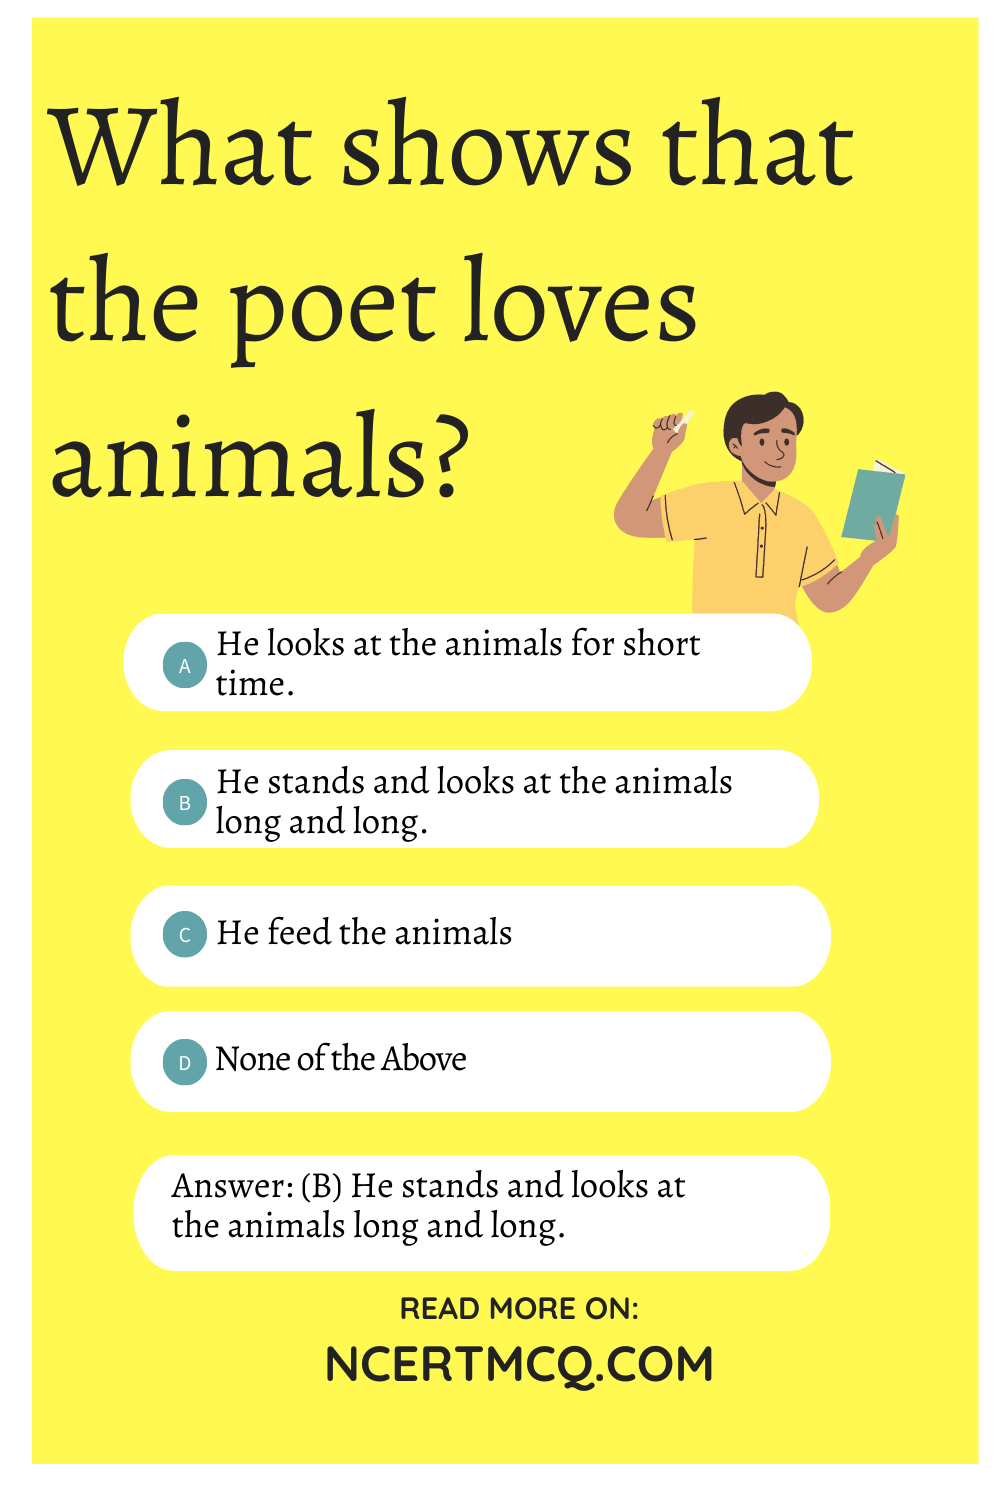 What shows that the poet loves animals?